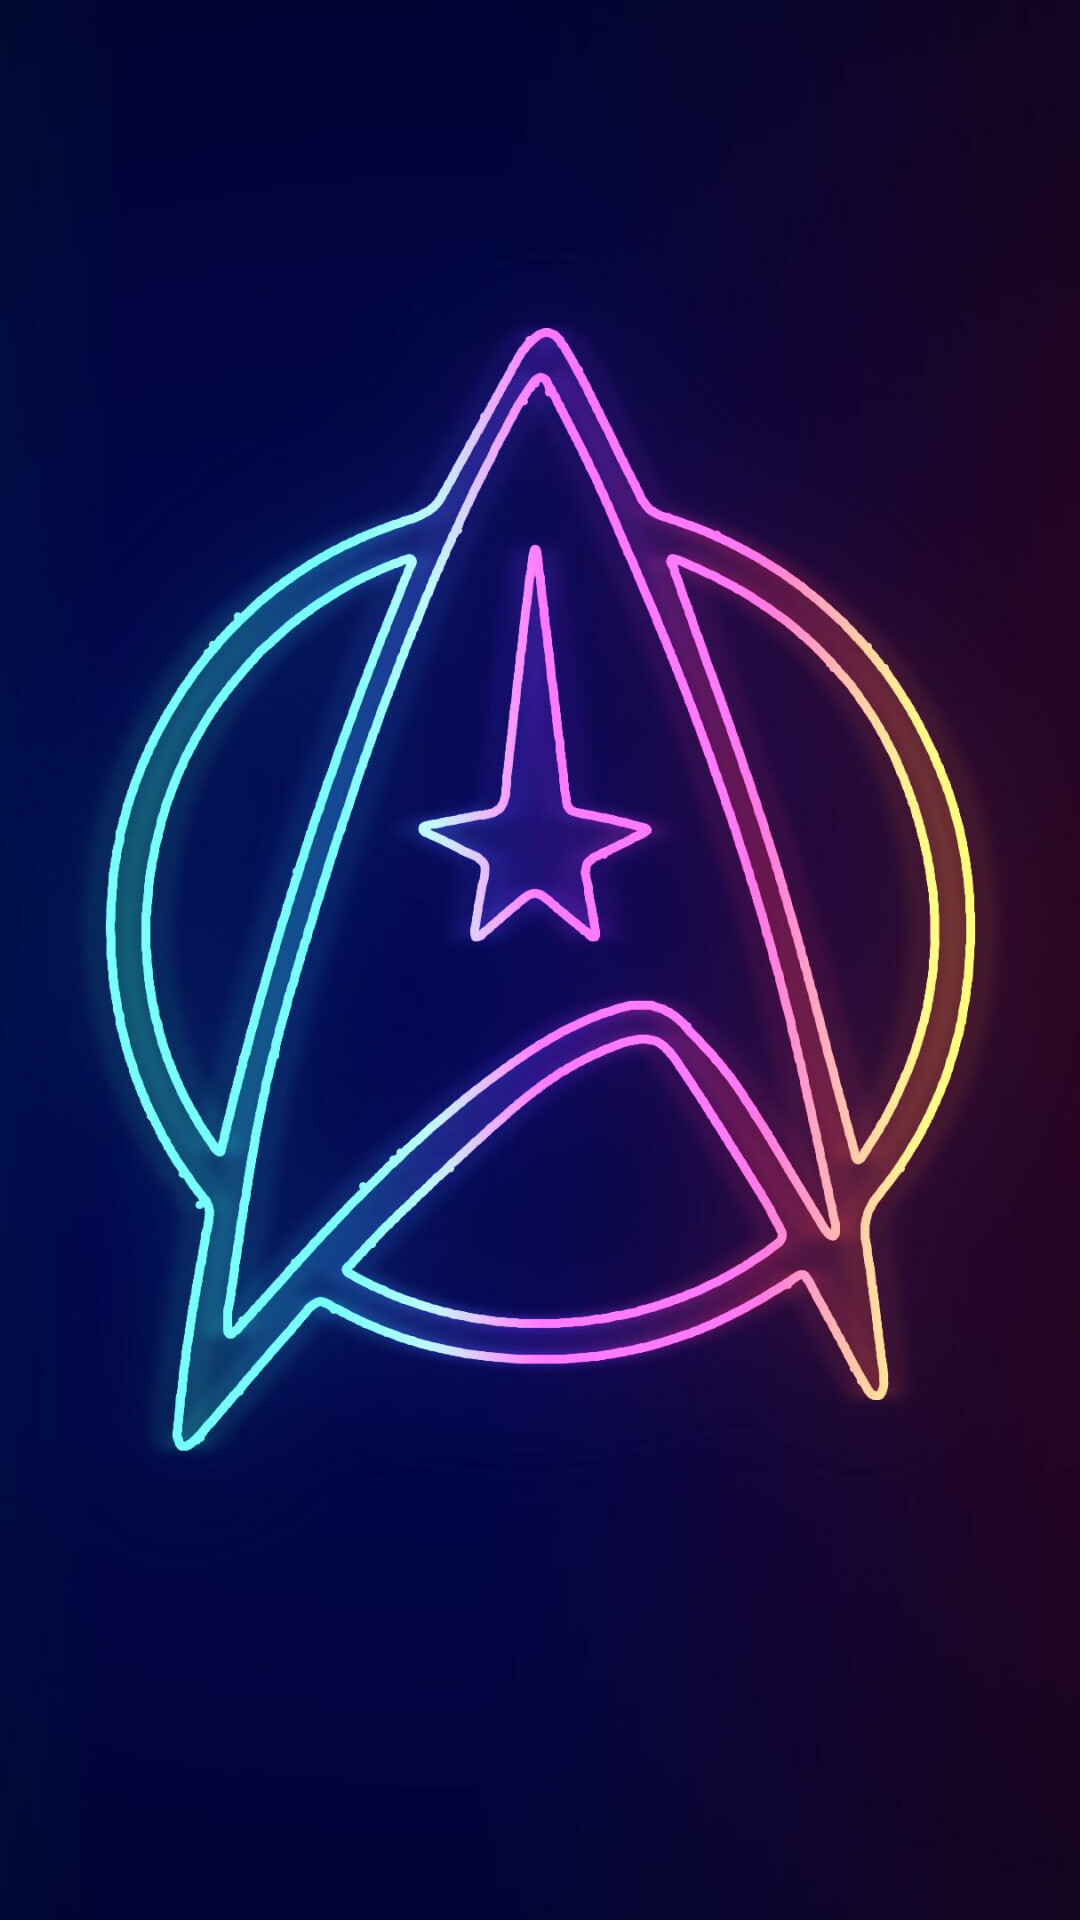 Star Trek: Neon sign, The Enterprise engages in an altruistic research mission intended to document and observe the far reaches of space. 1080x1920 Full HD Wallpaper.